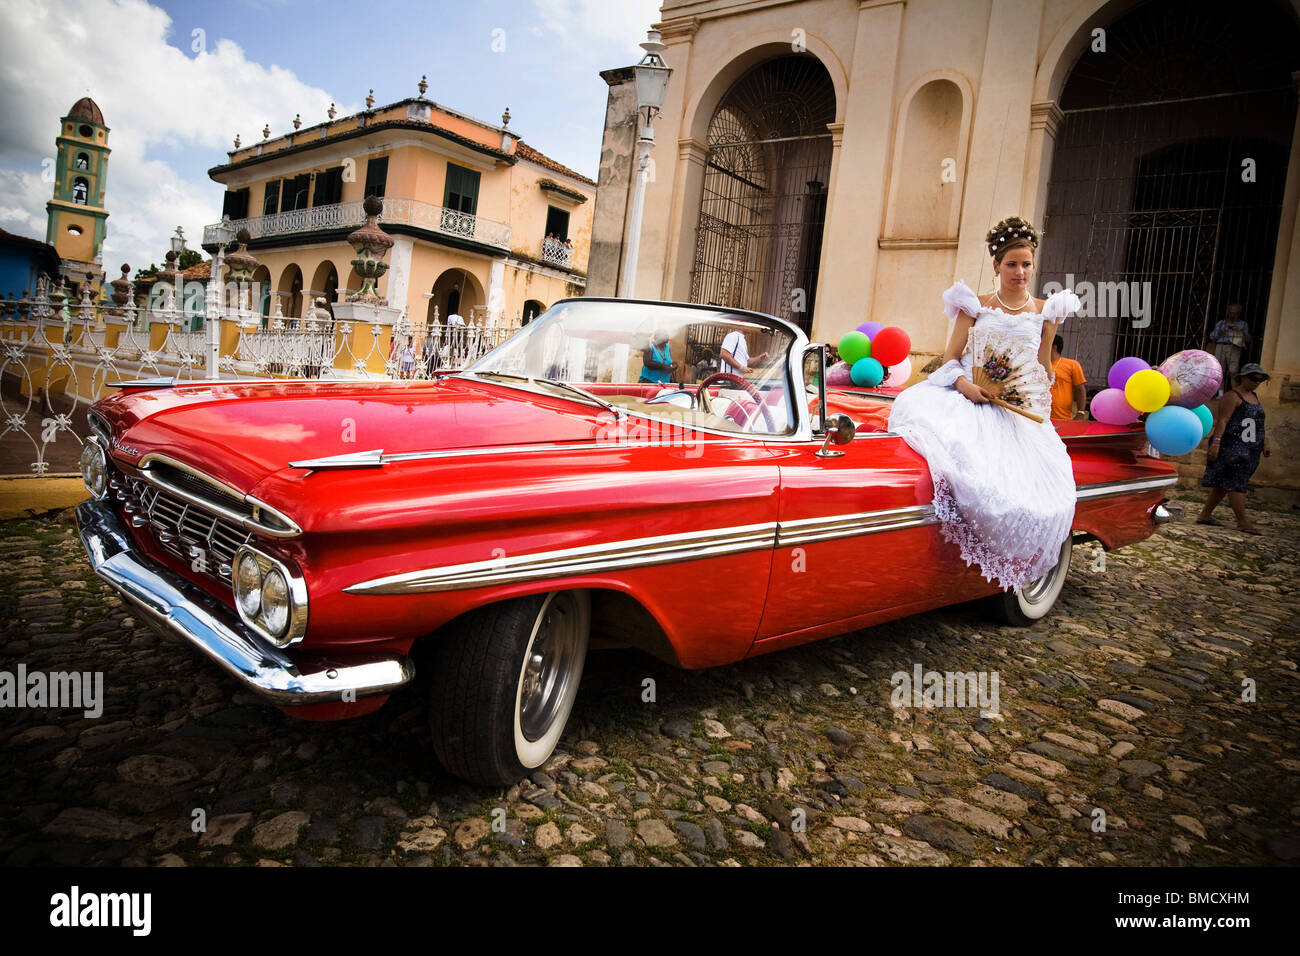 Fourteen-year-old girl sits on a vintage car as she poses for a photo on the day of her Quinceanera party in Trinidad, Cuba Stock Photo